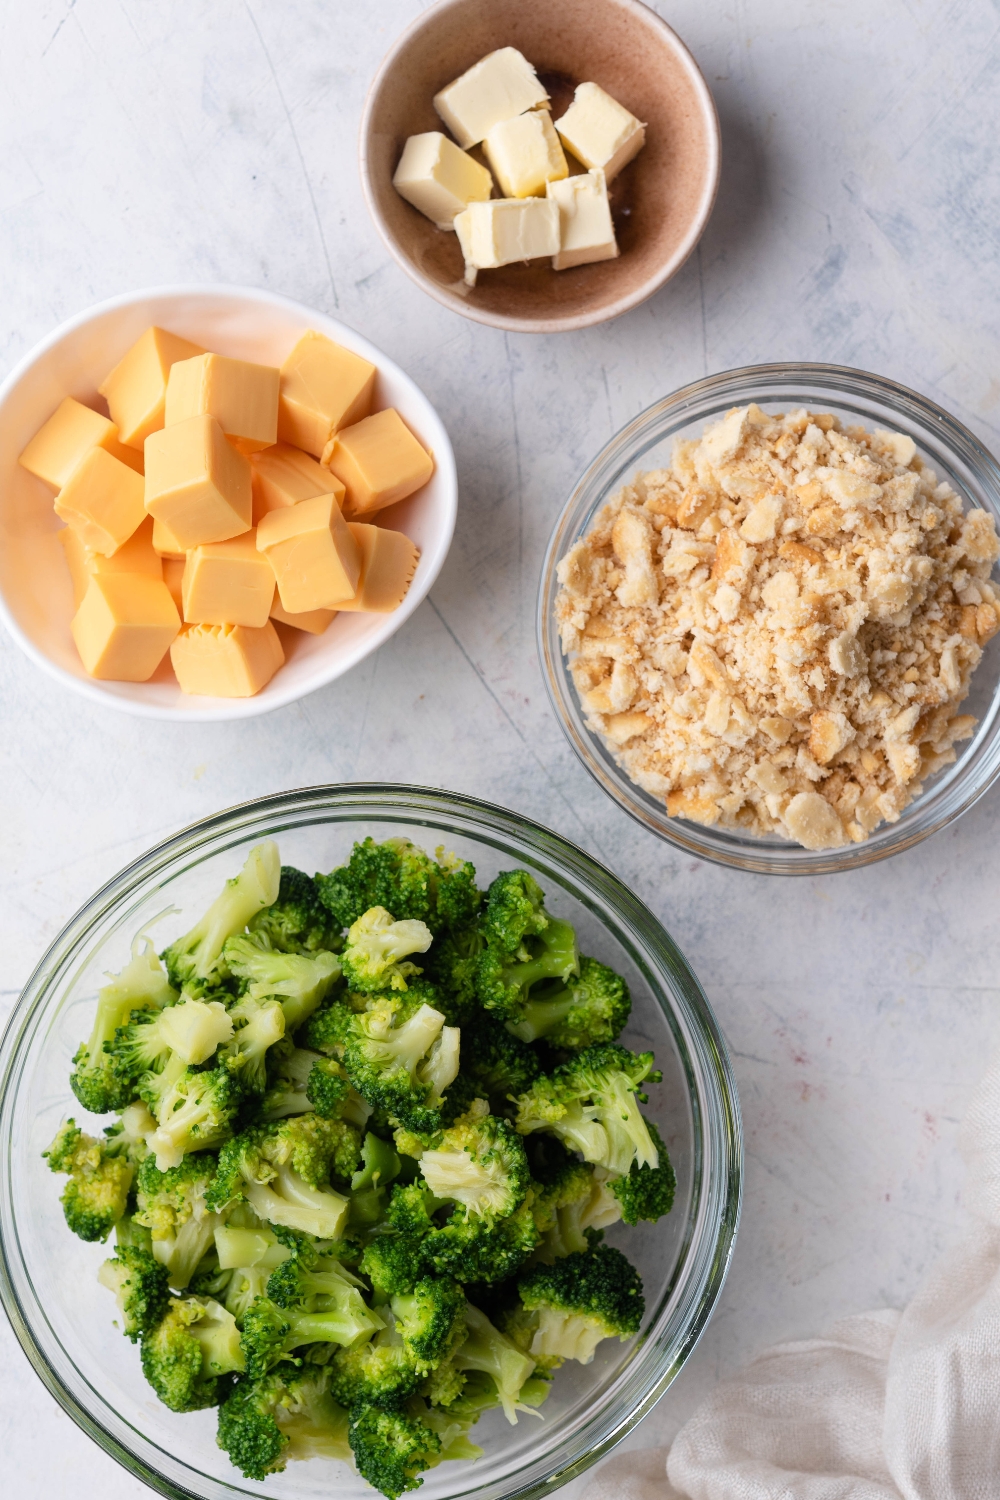 A countertop with multiple bowls containing broccoli, crushed crackers, cubed cheese, and cubed butter.